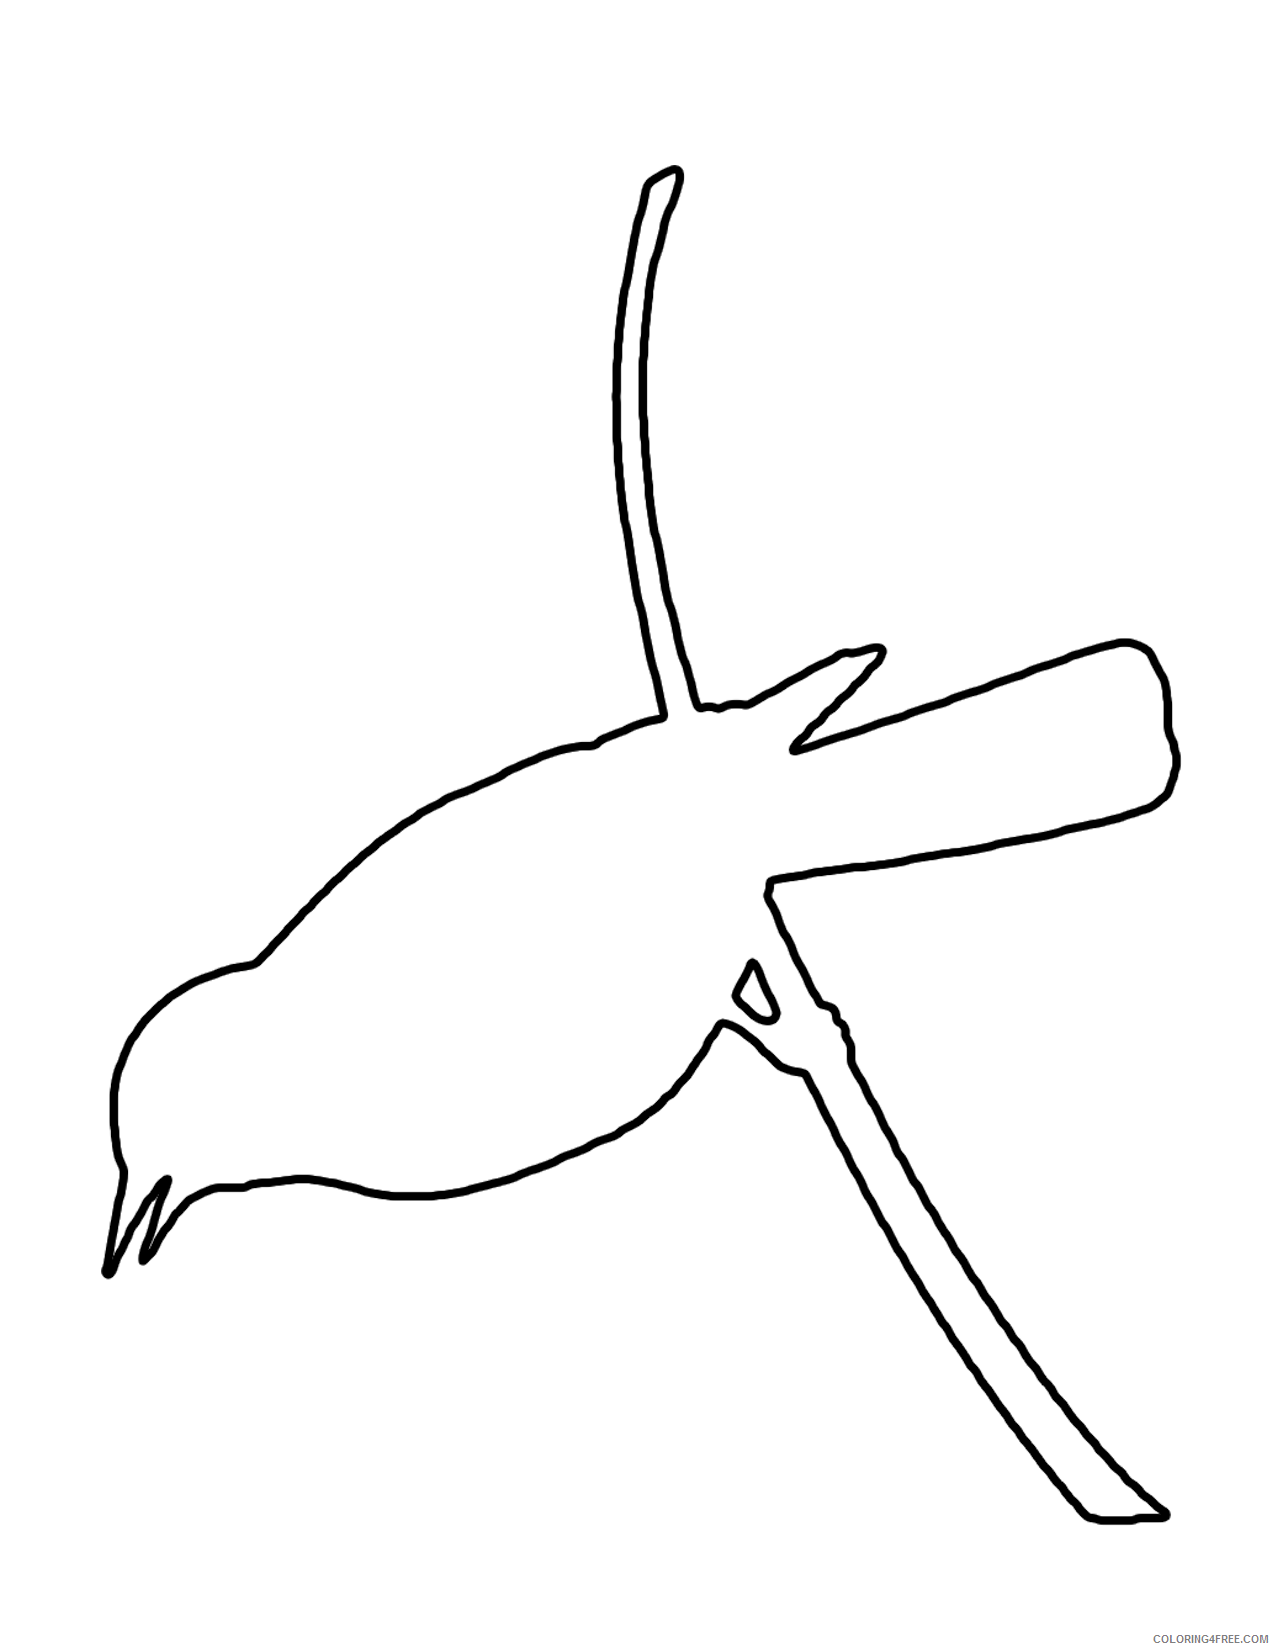 Bird Outline Coloring Pages bird outline l4SLvL png Printable Coloring4free